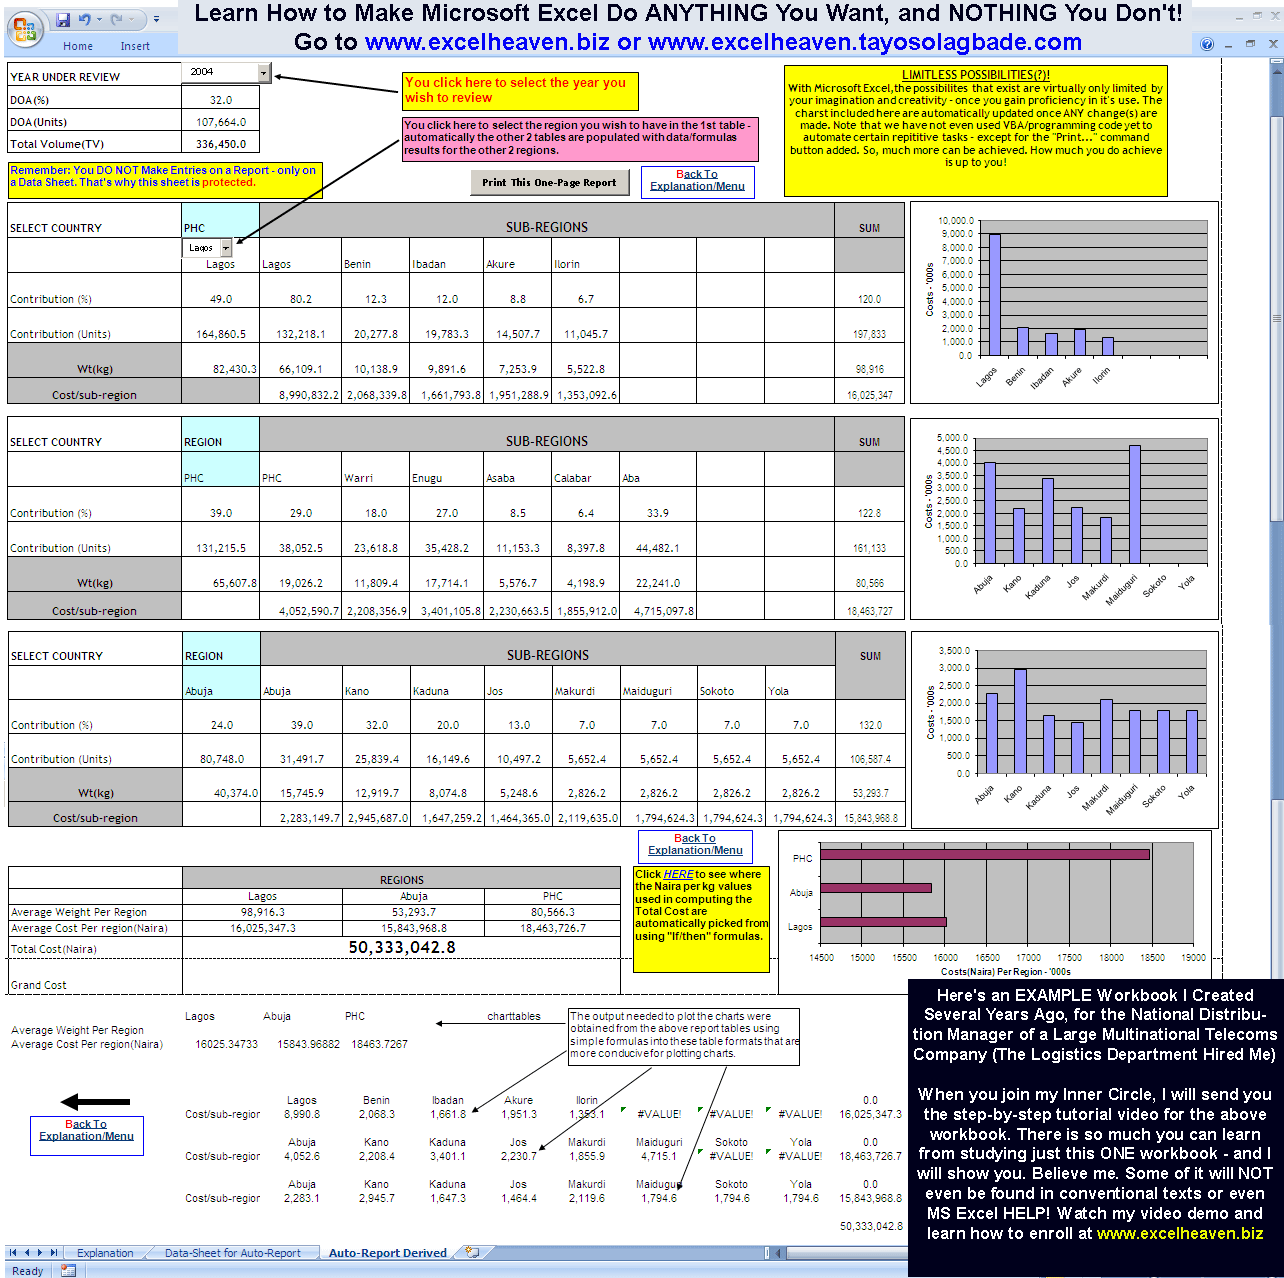 Screenshot of a tutorial workbook I created several years ago, for the National Distribution Manager of a large multinational telecoms company (The Logistics Department hired me) - Click to view larger image in new window